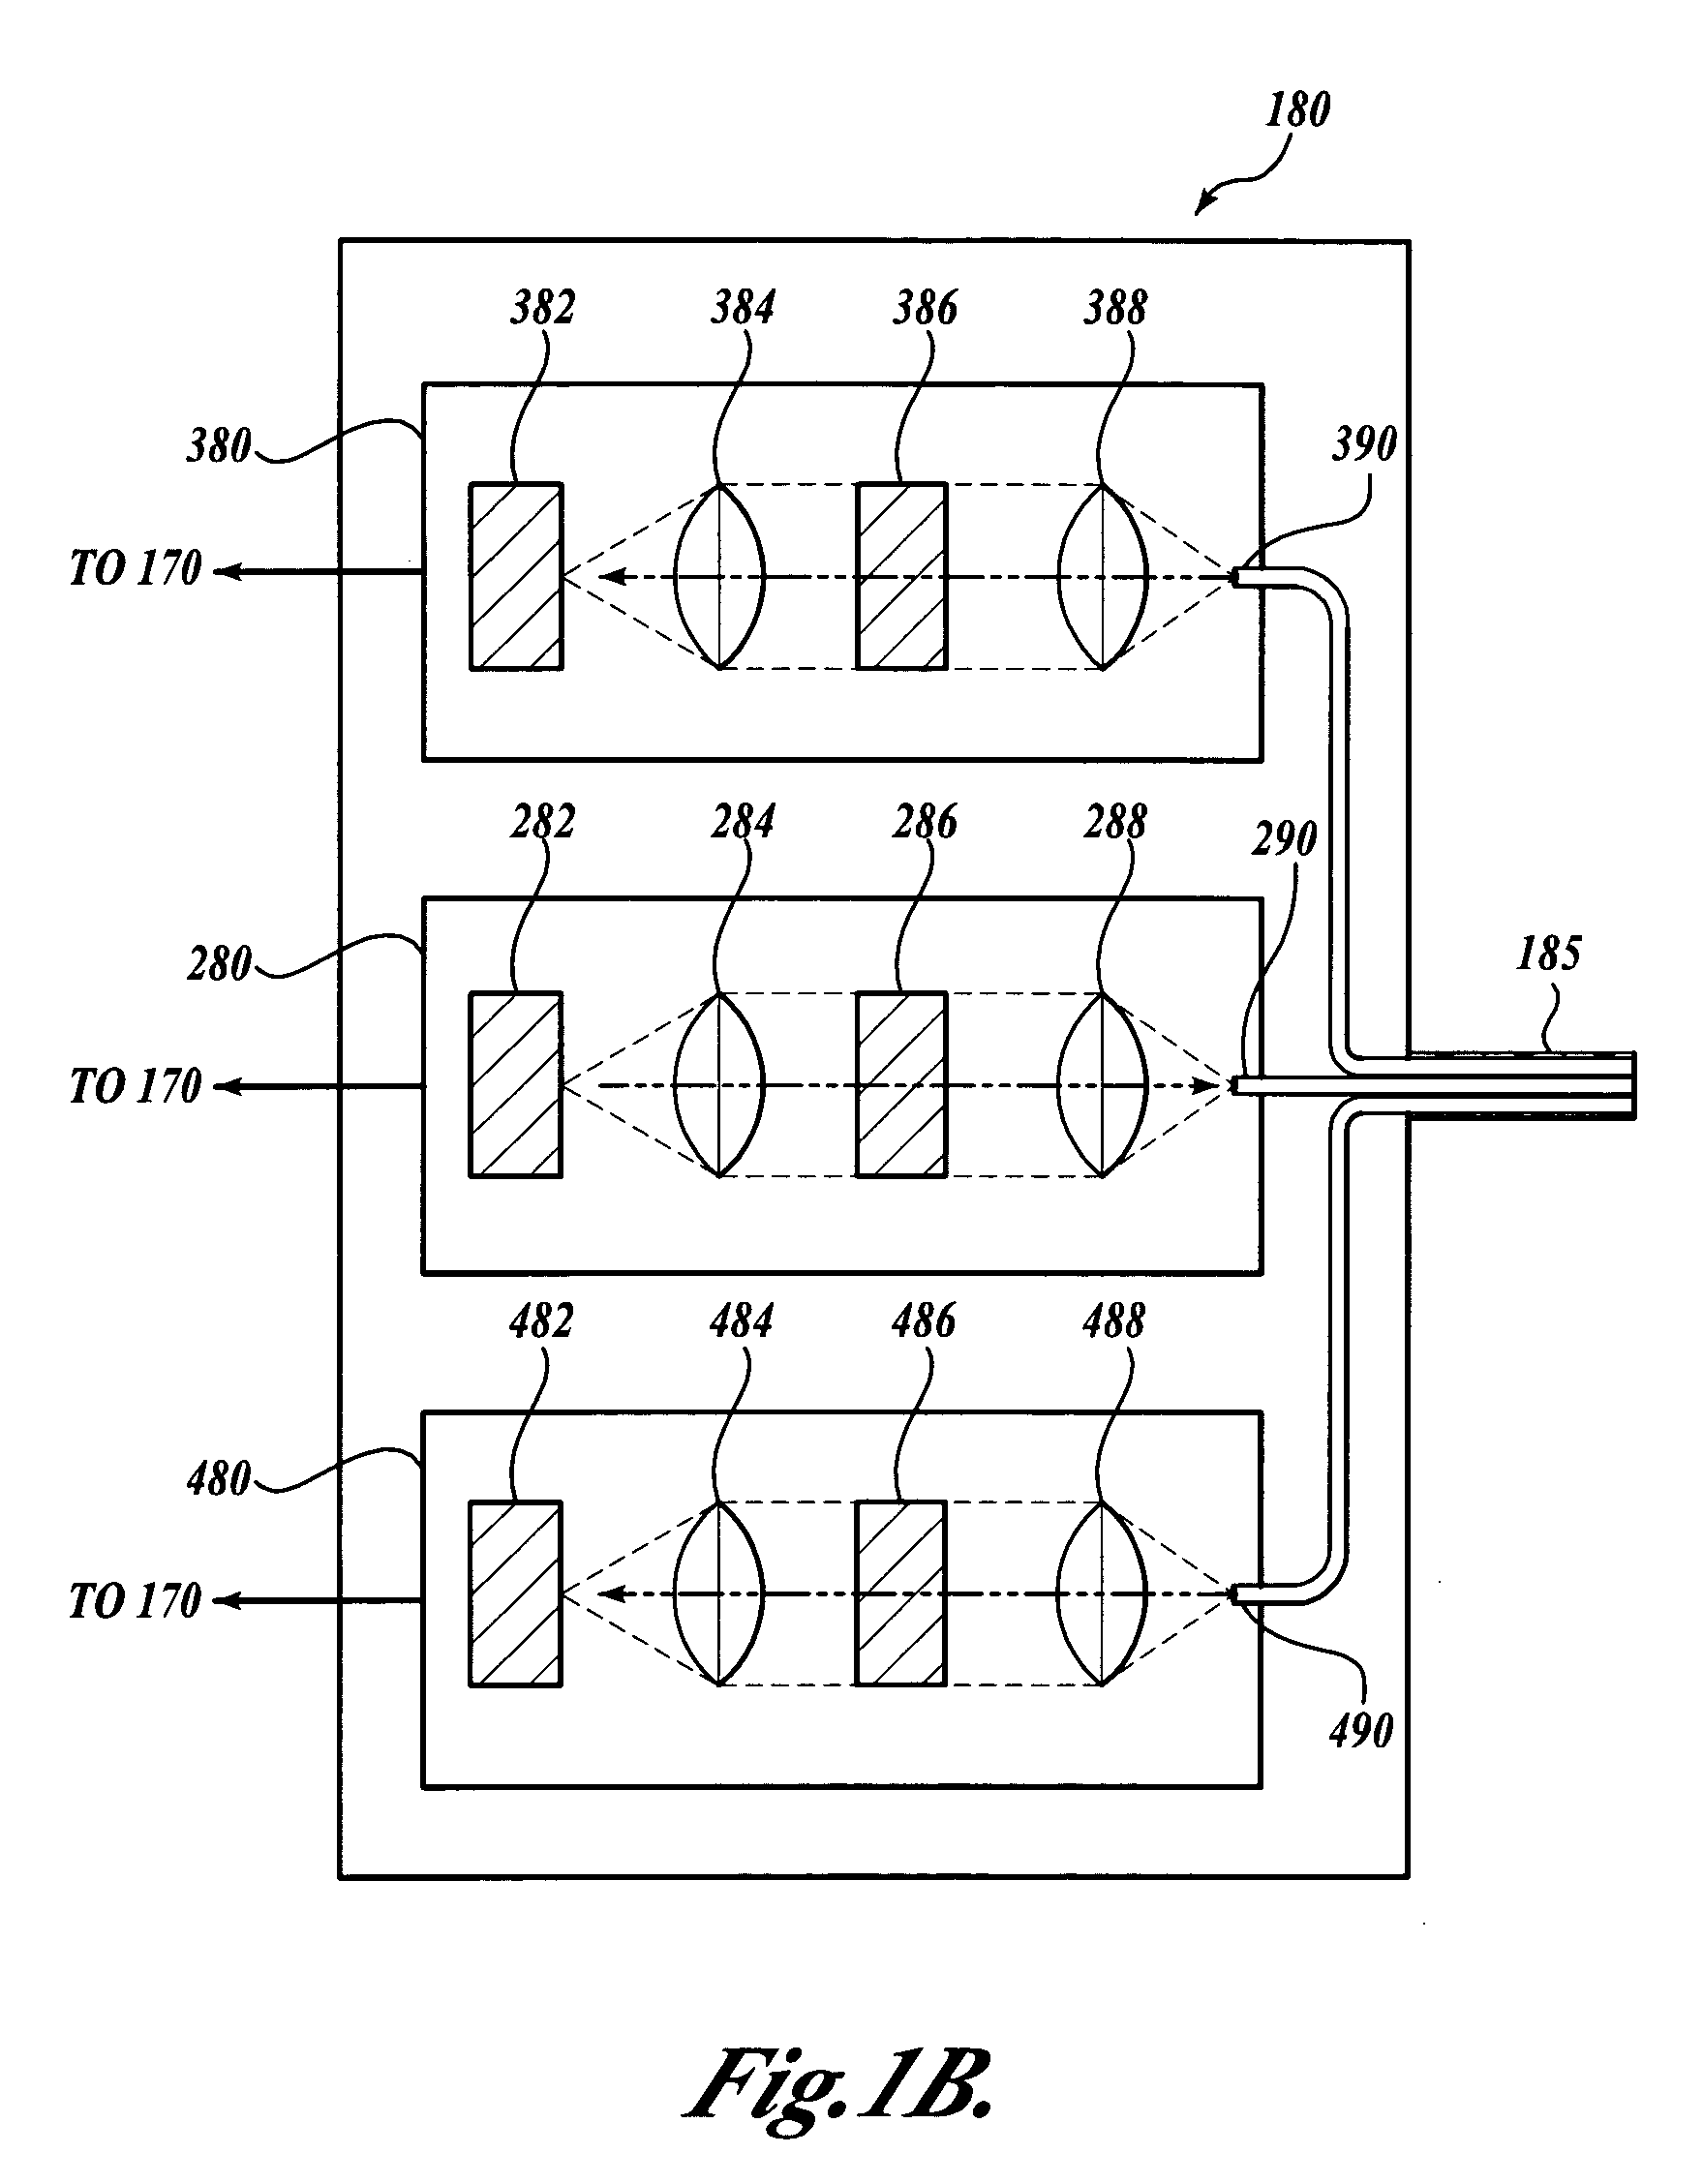 Fluorescent pH detector system and related methods